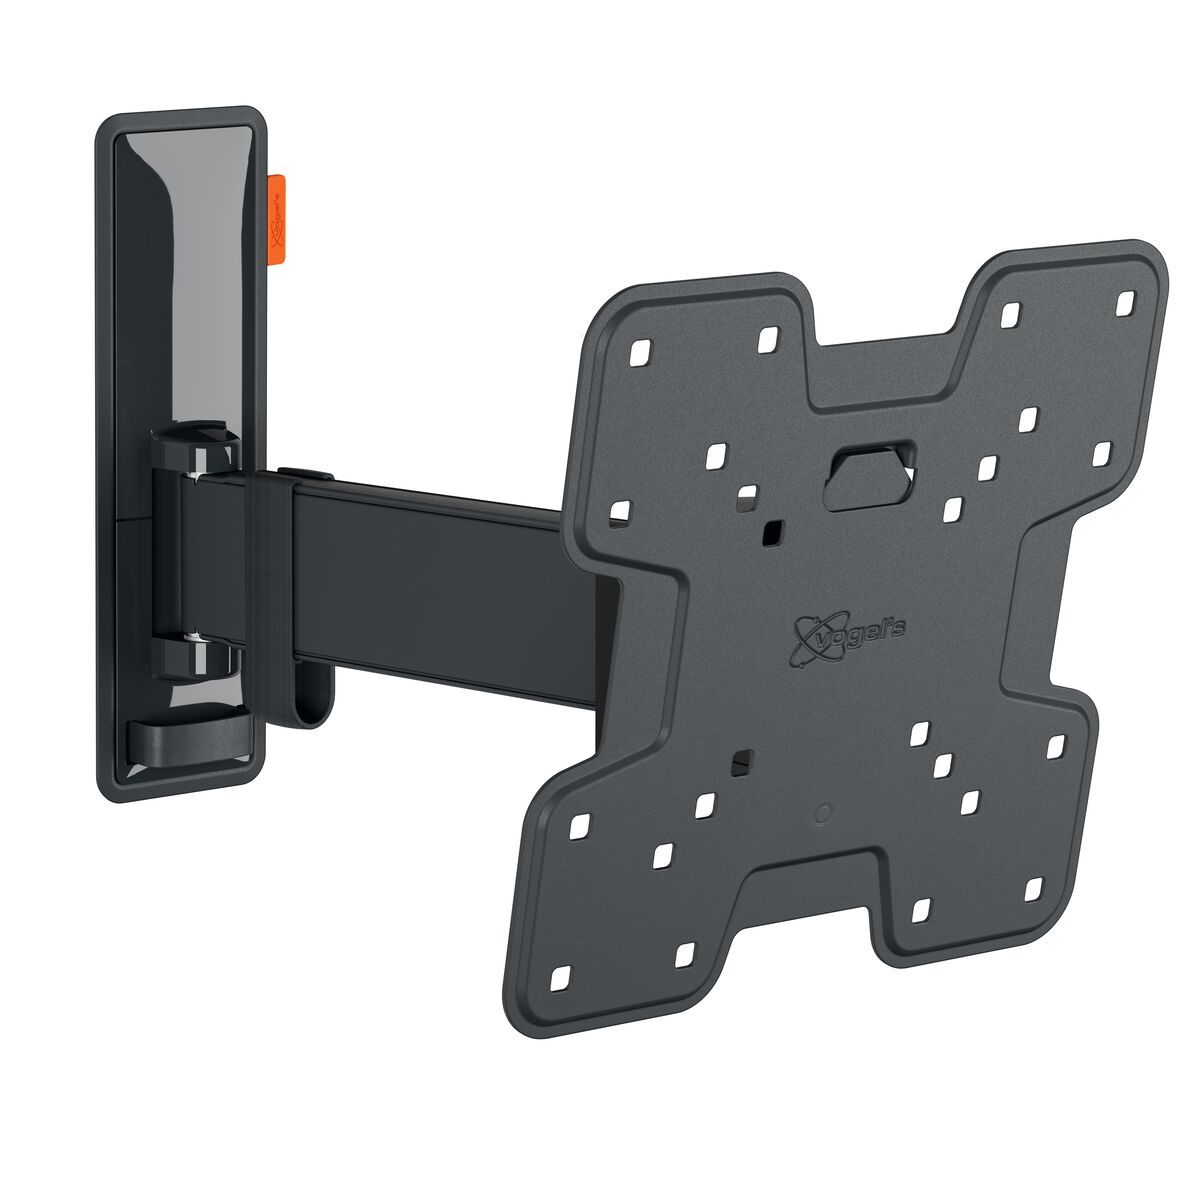 Vogel's TVM 3223 Full-Motion TV Wall Mount - Suitable for 19 up to 43 inch TVs - Motion (up to 120°) swivel - Tilt up to 20° - Product